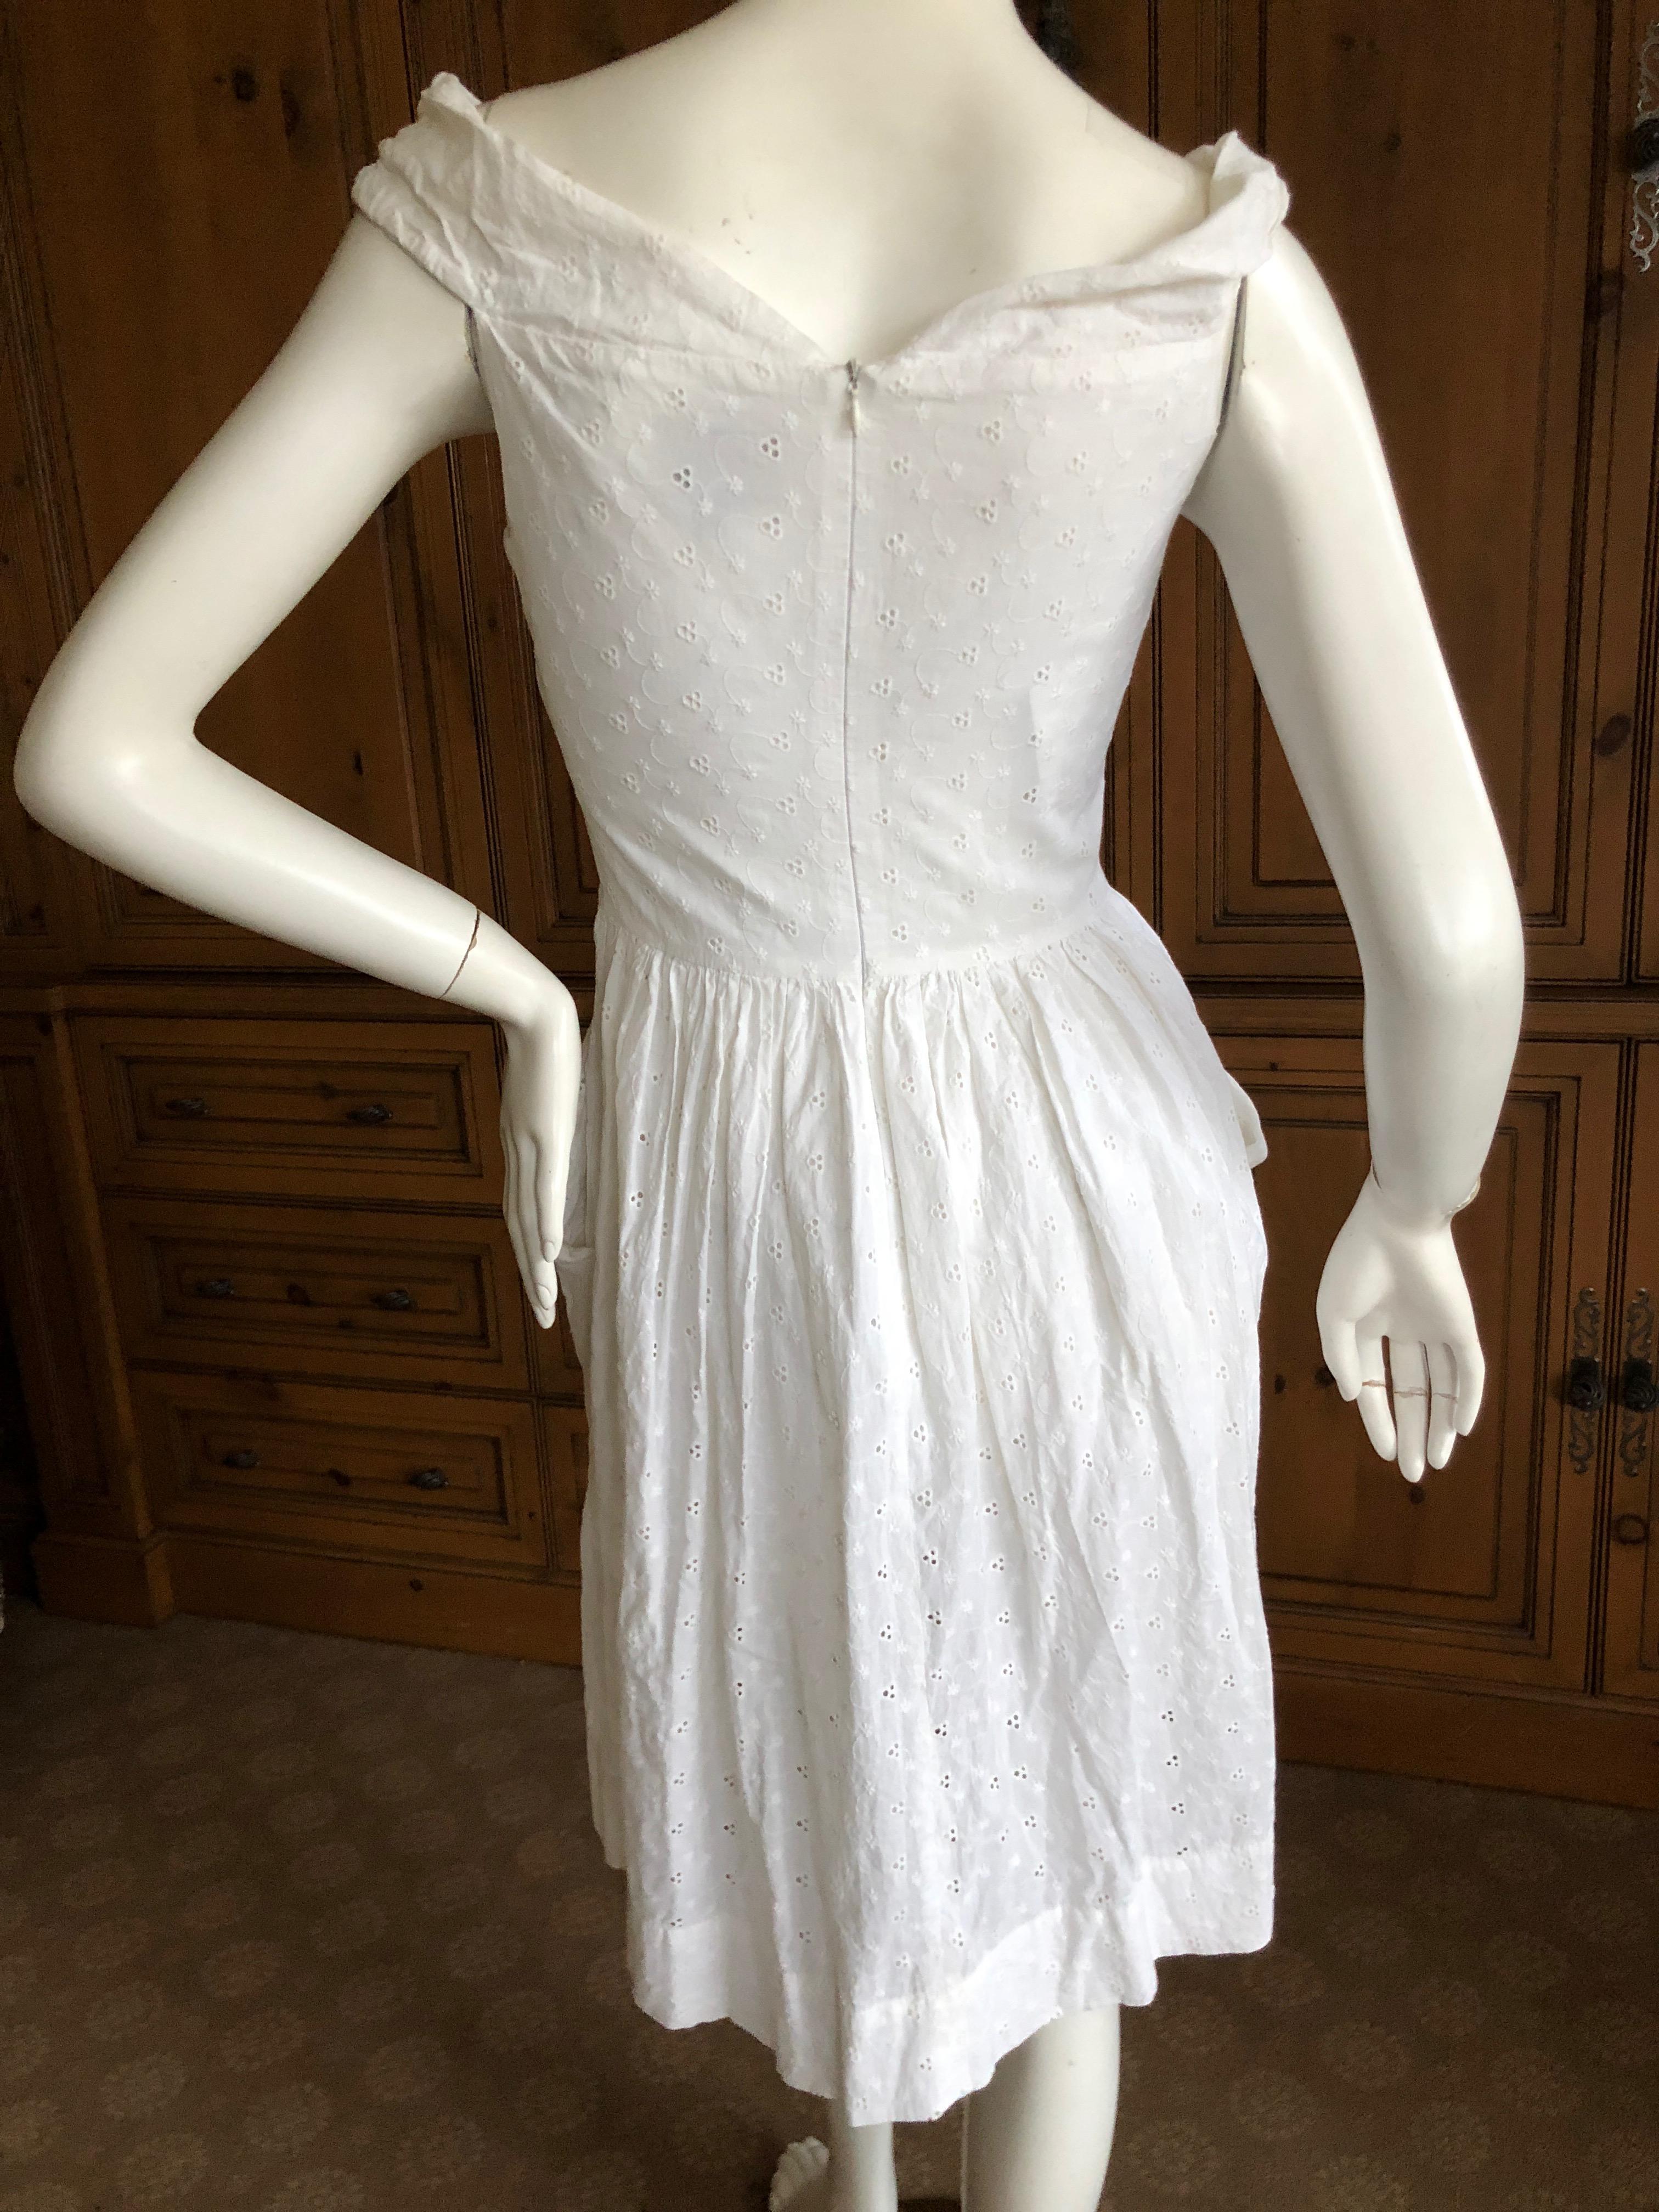 Vivienne Westwood Anglomania White Cotton Eyelet Dress For Sale 2